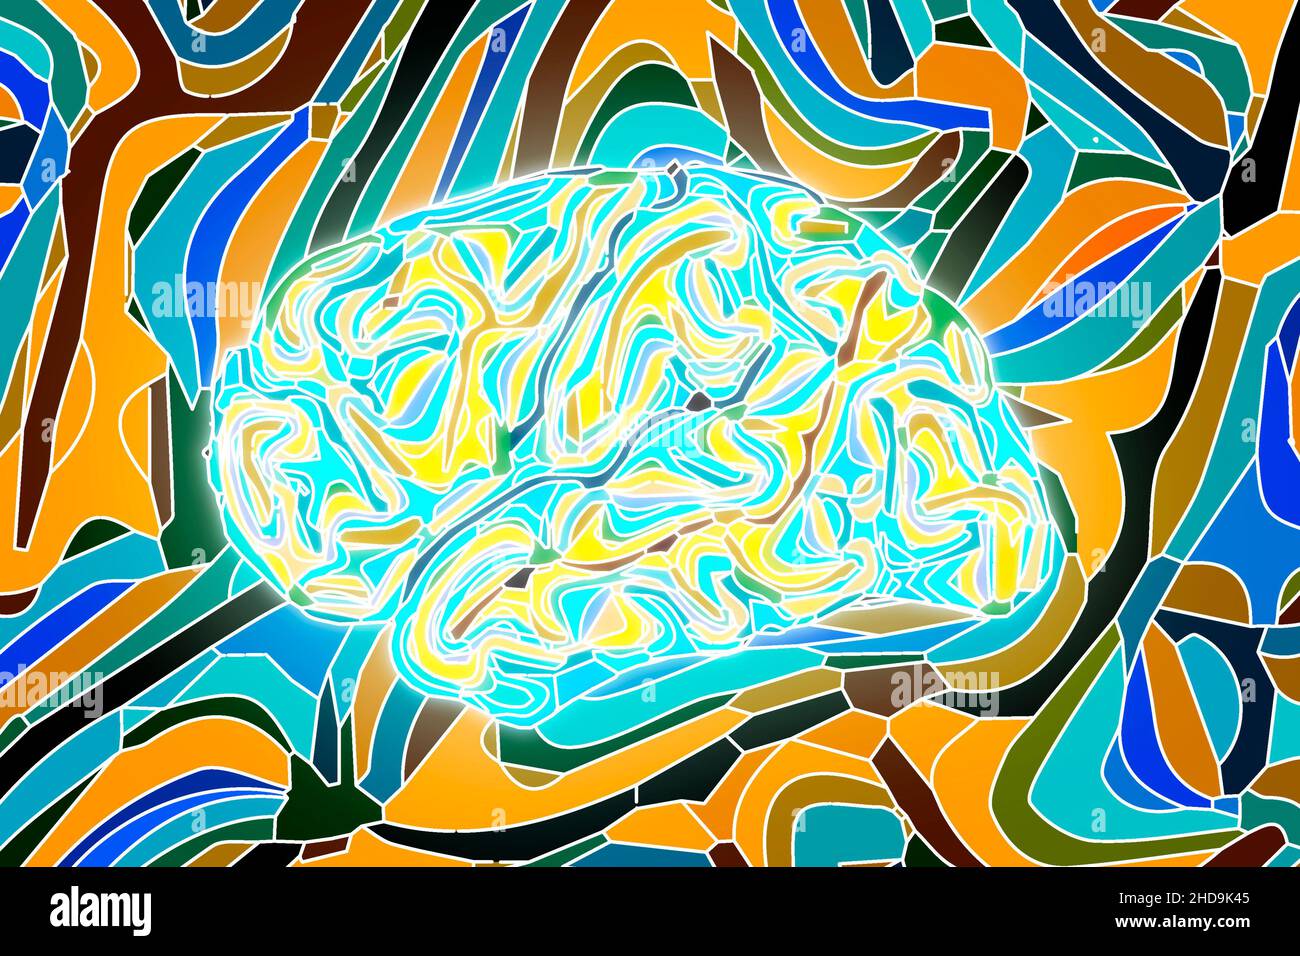 An illustration of a brain on a colorful segmented background Stock Photo